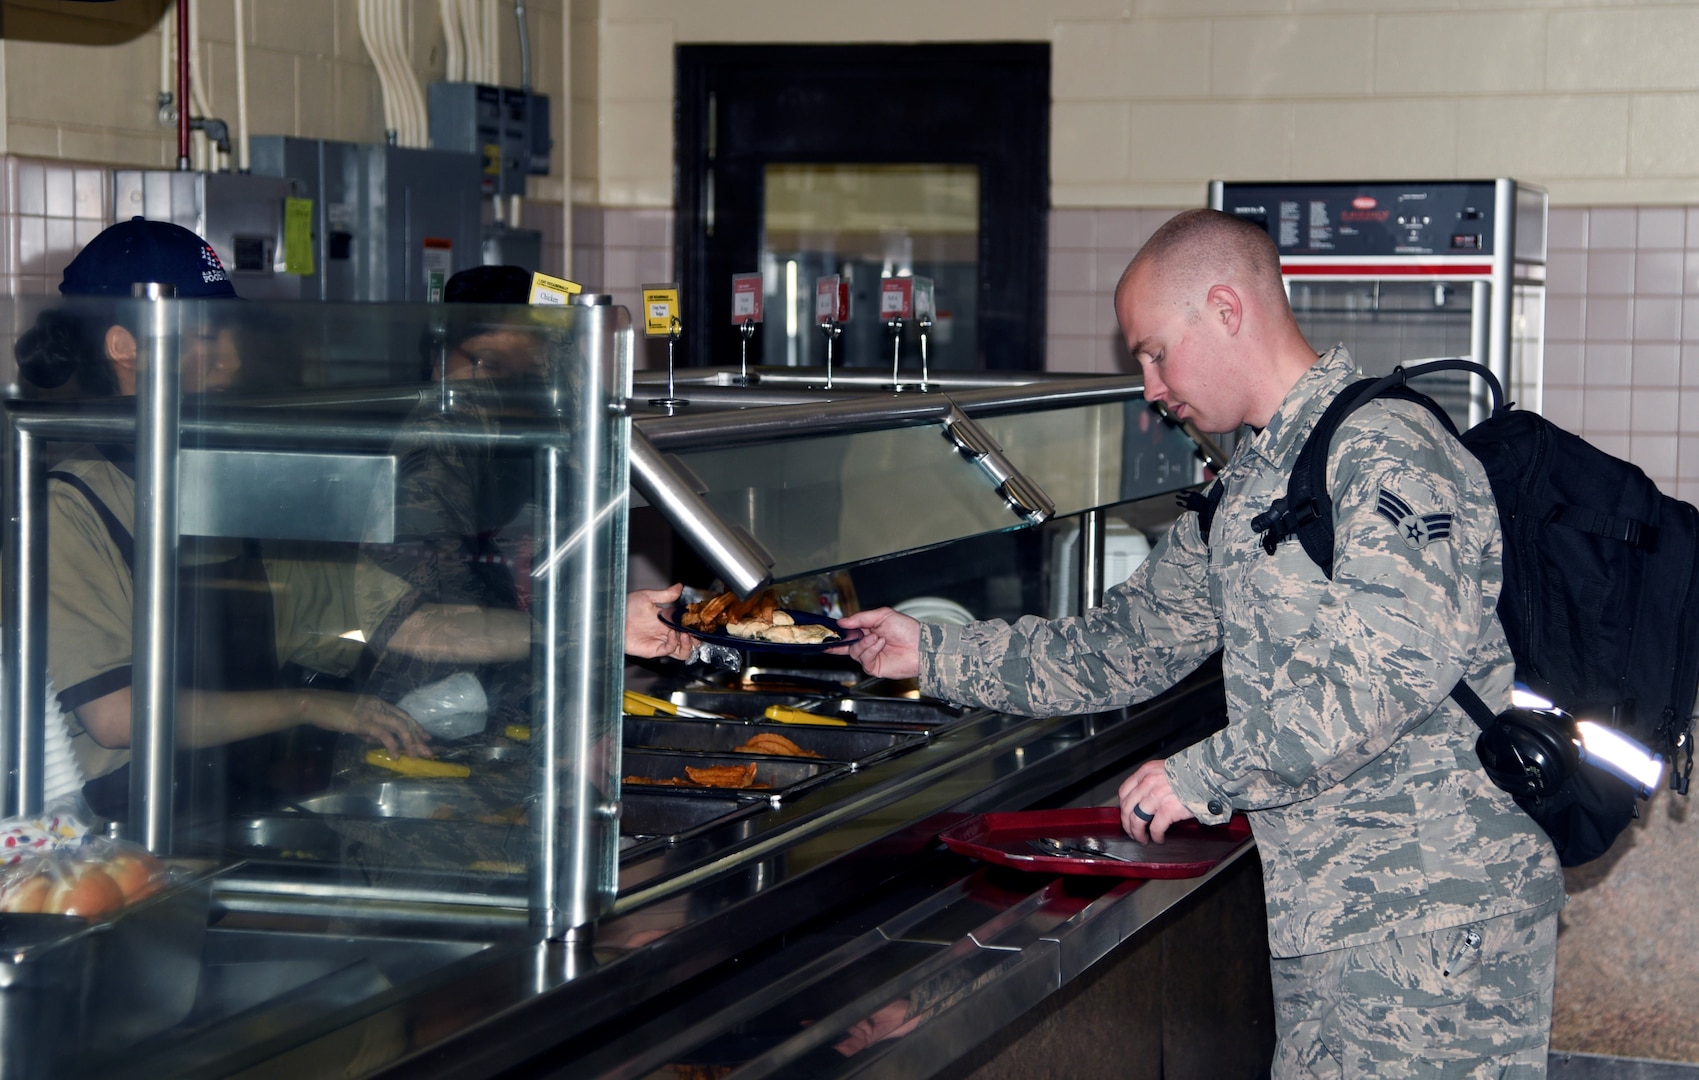 Contracted employees from the 8th Force Support Squadron, serve a service member during lunch, March 22, 2018 at Kunsan Air Base, Republic of Korea. The dining facility has more than 50 Korean Department of Defense and civilian employees staffed. (U.S. Air Force photo by Senior Airman Colby L. Hardin)